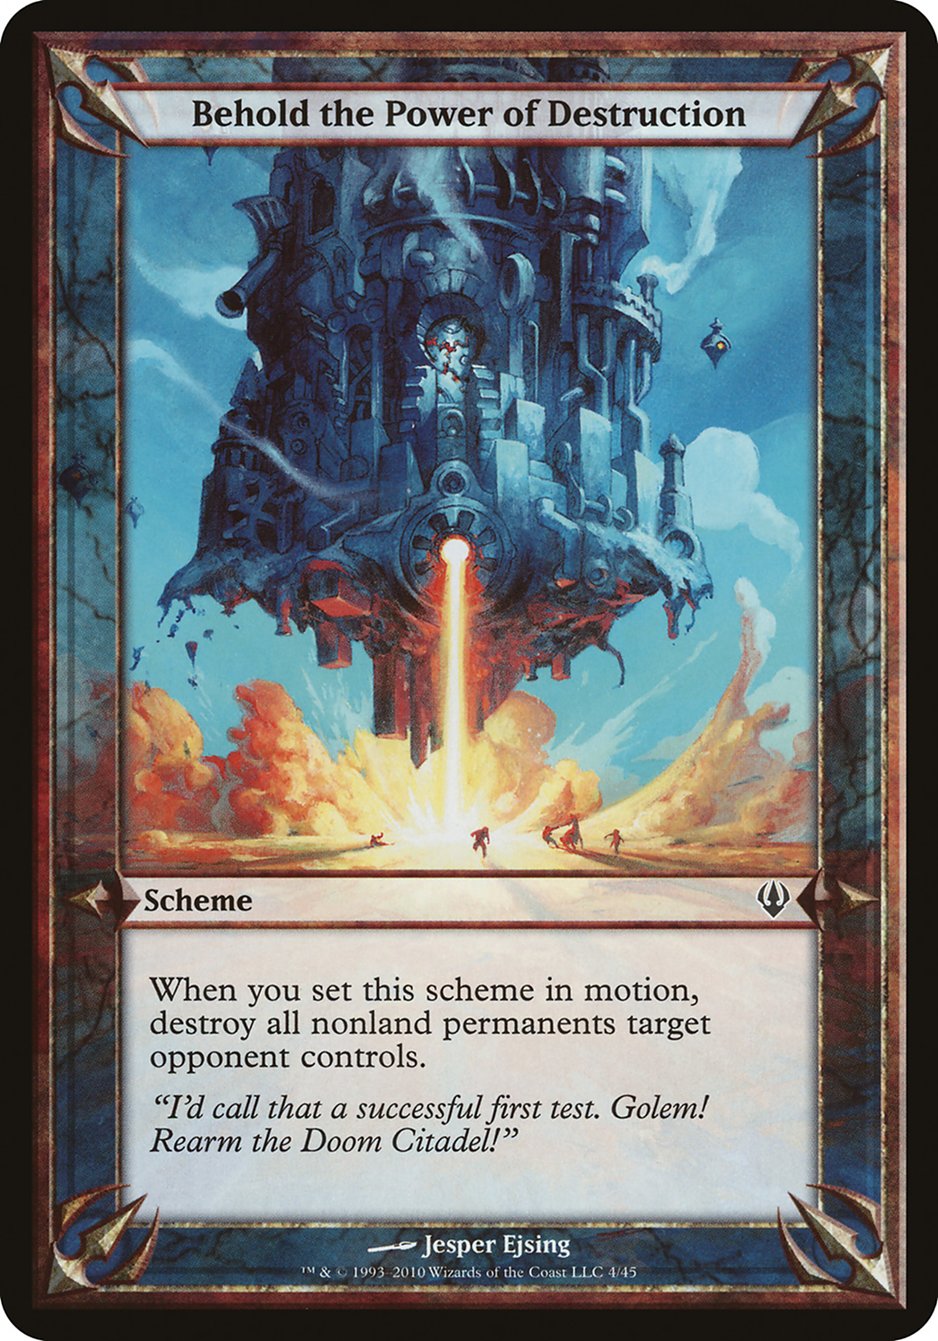 Behold the Power of Destruction - MTG Card versions